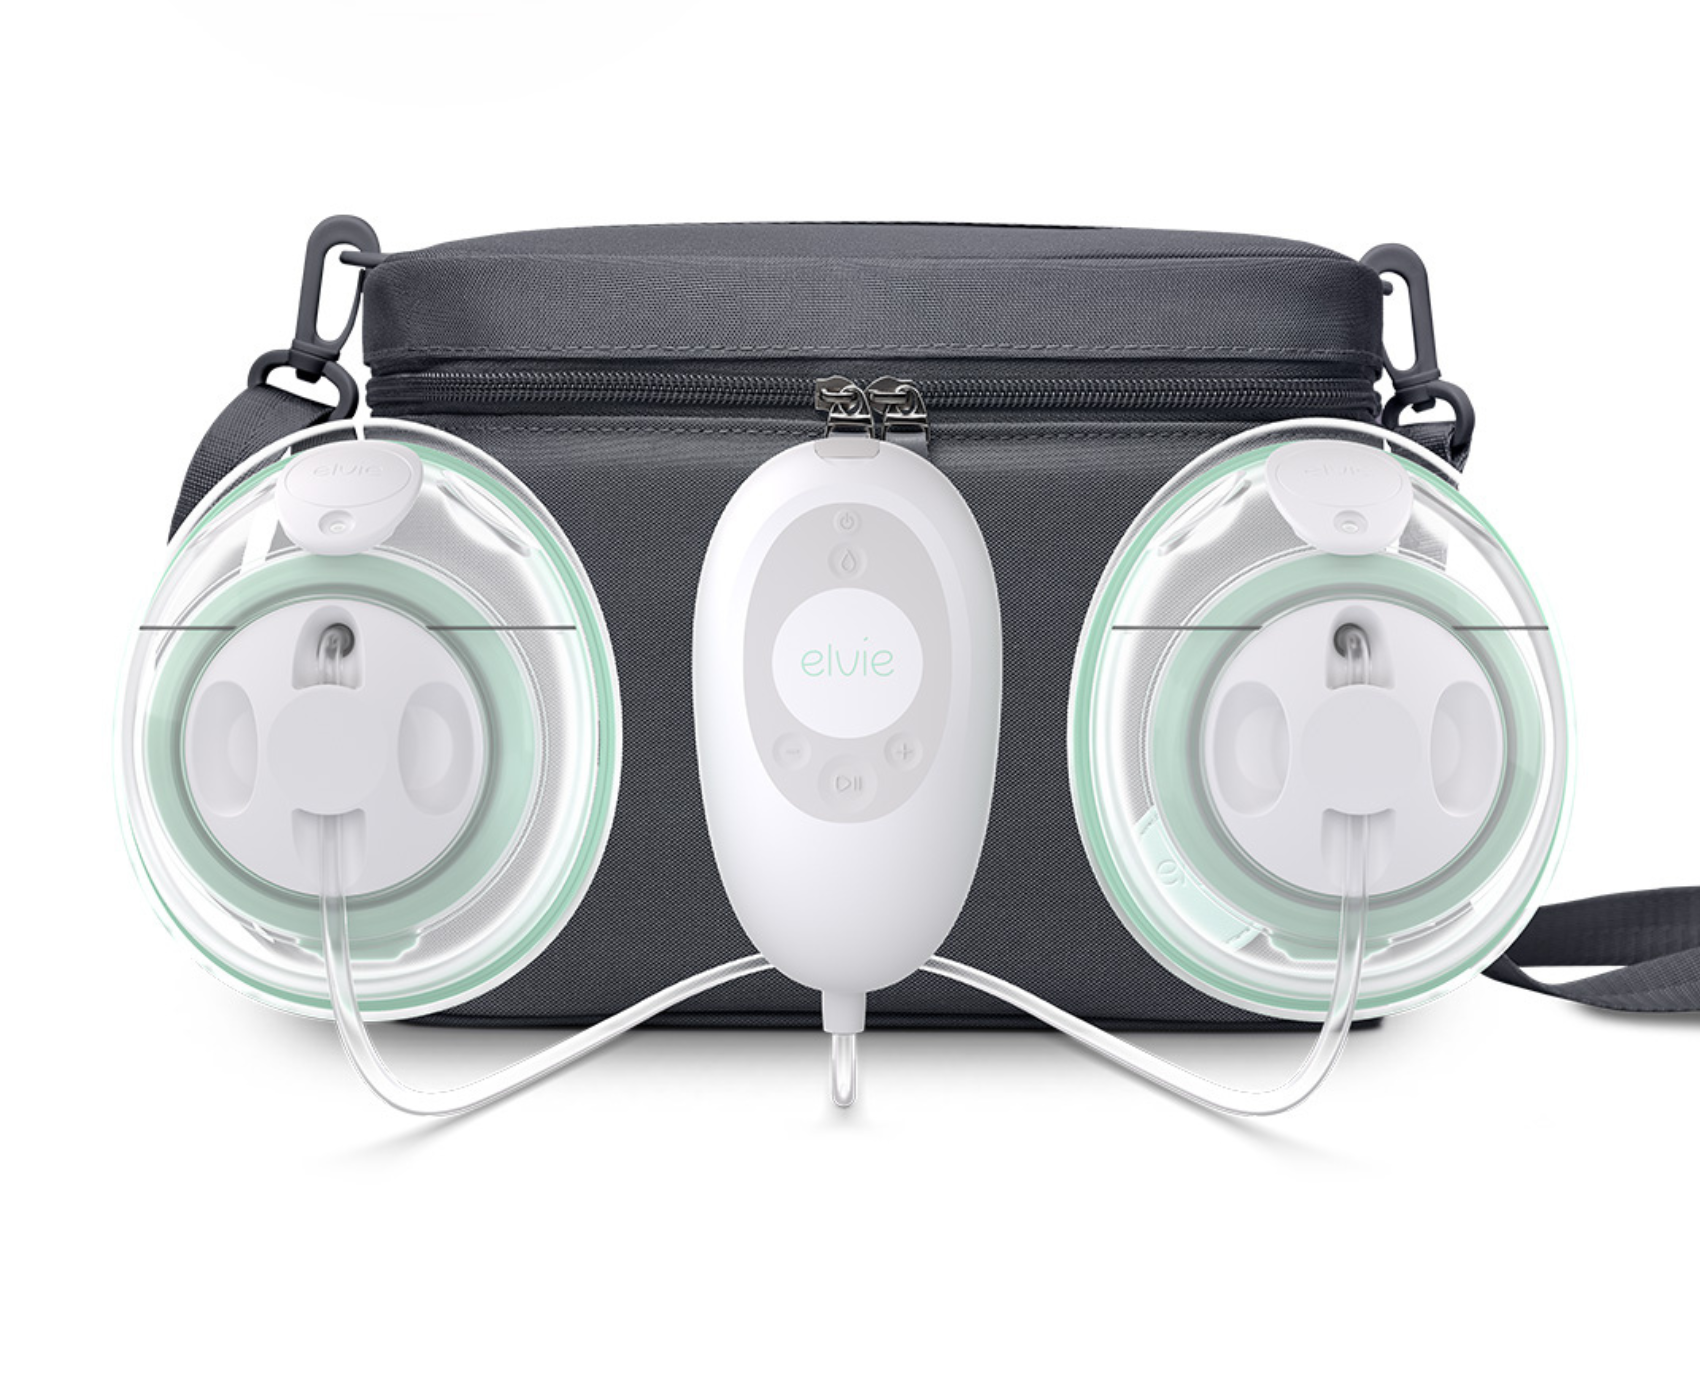 Best Wearable Breast Pumps - Acelleron Medical Products